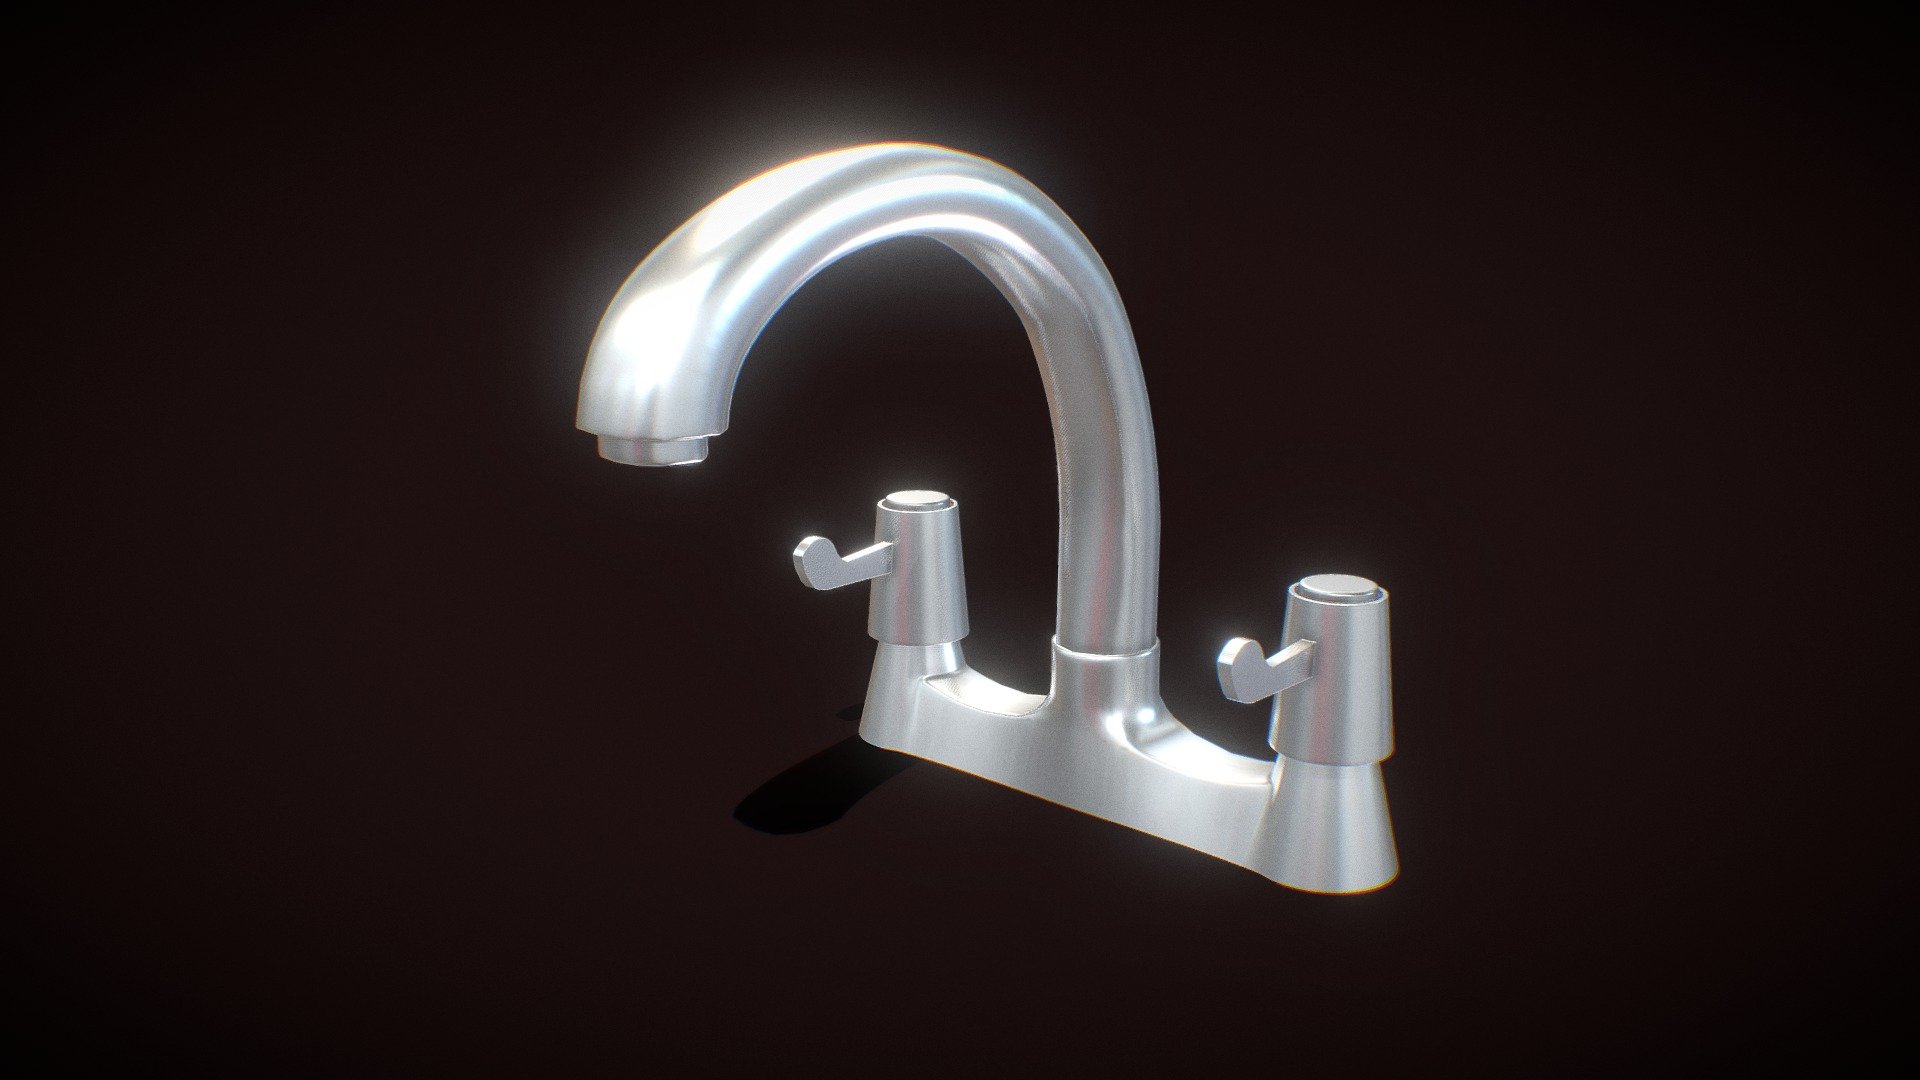 Cartridge TAP 3d model ready for VirtualReality(VR),Augmented Reality(AR),games and other render engines.This lowpoly 3d model is baked with 4k resolution textures.The PBR_Maps includes- albedo,roughness,metallic and normal 3d model